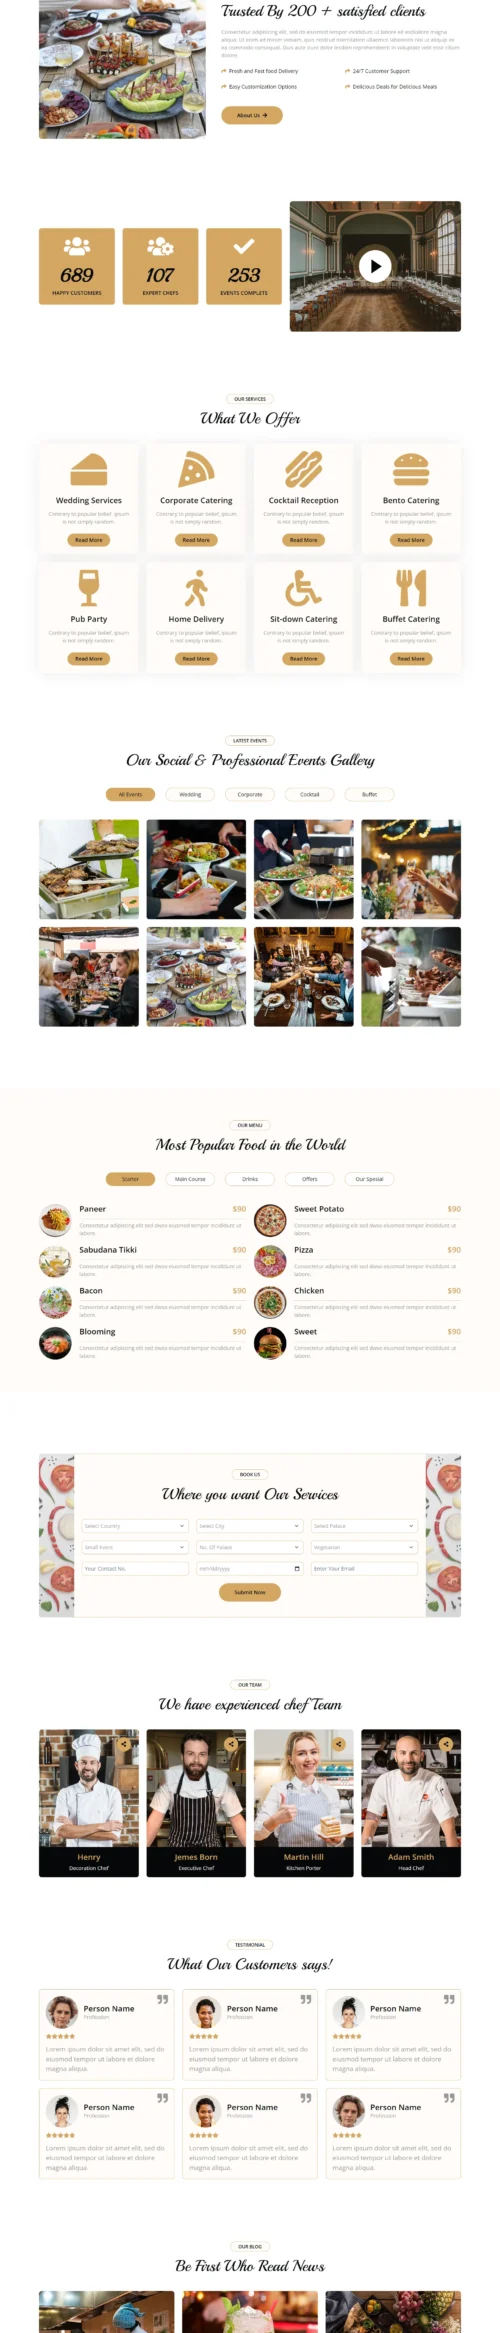 Catering Services digitizer sol WordPress Themes